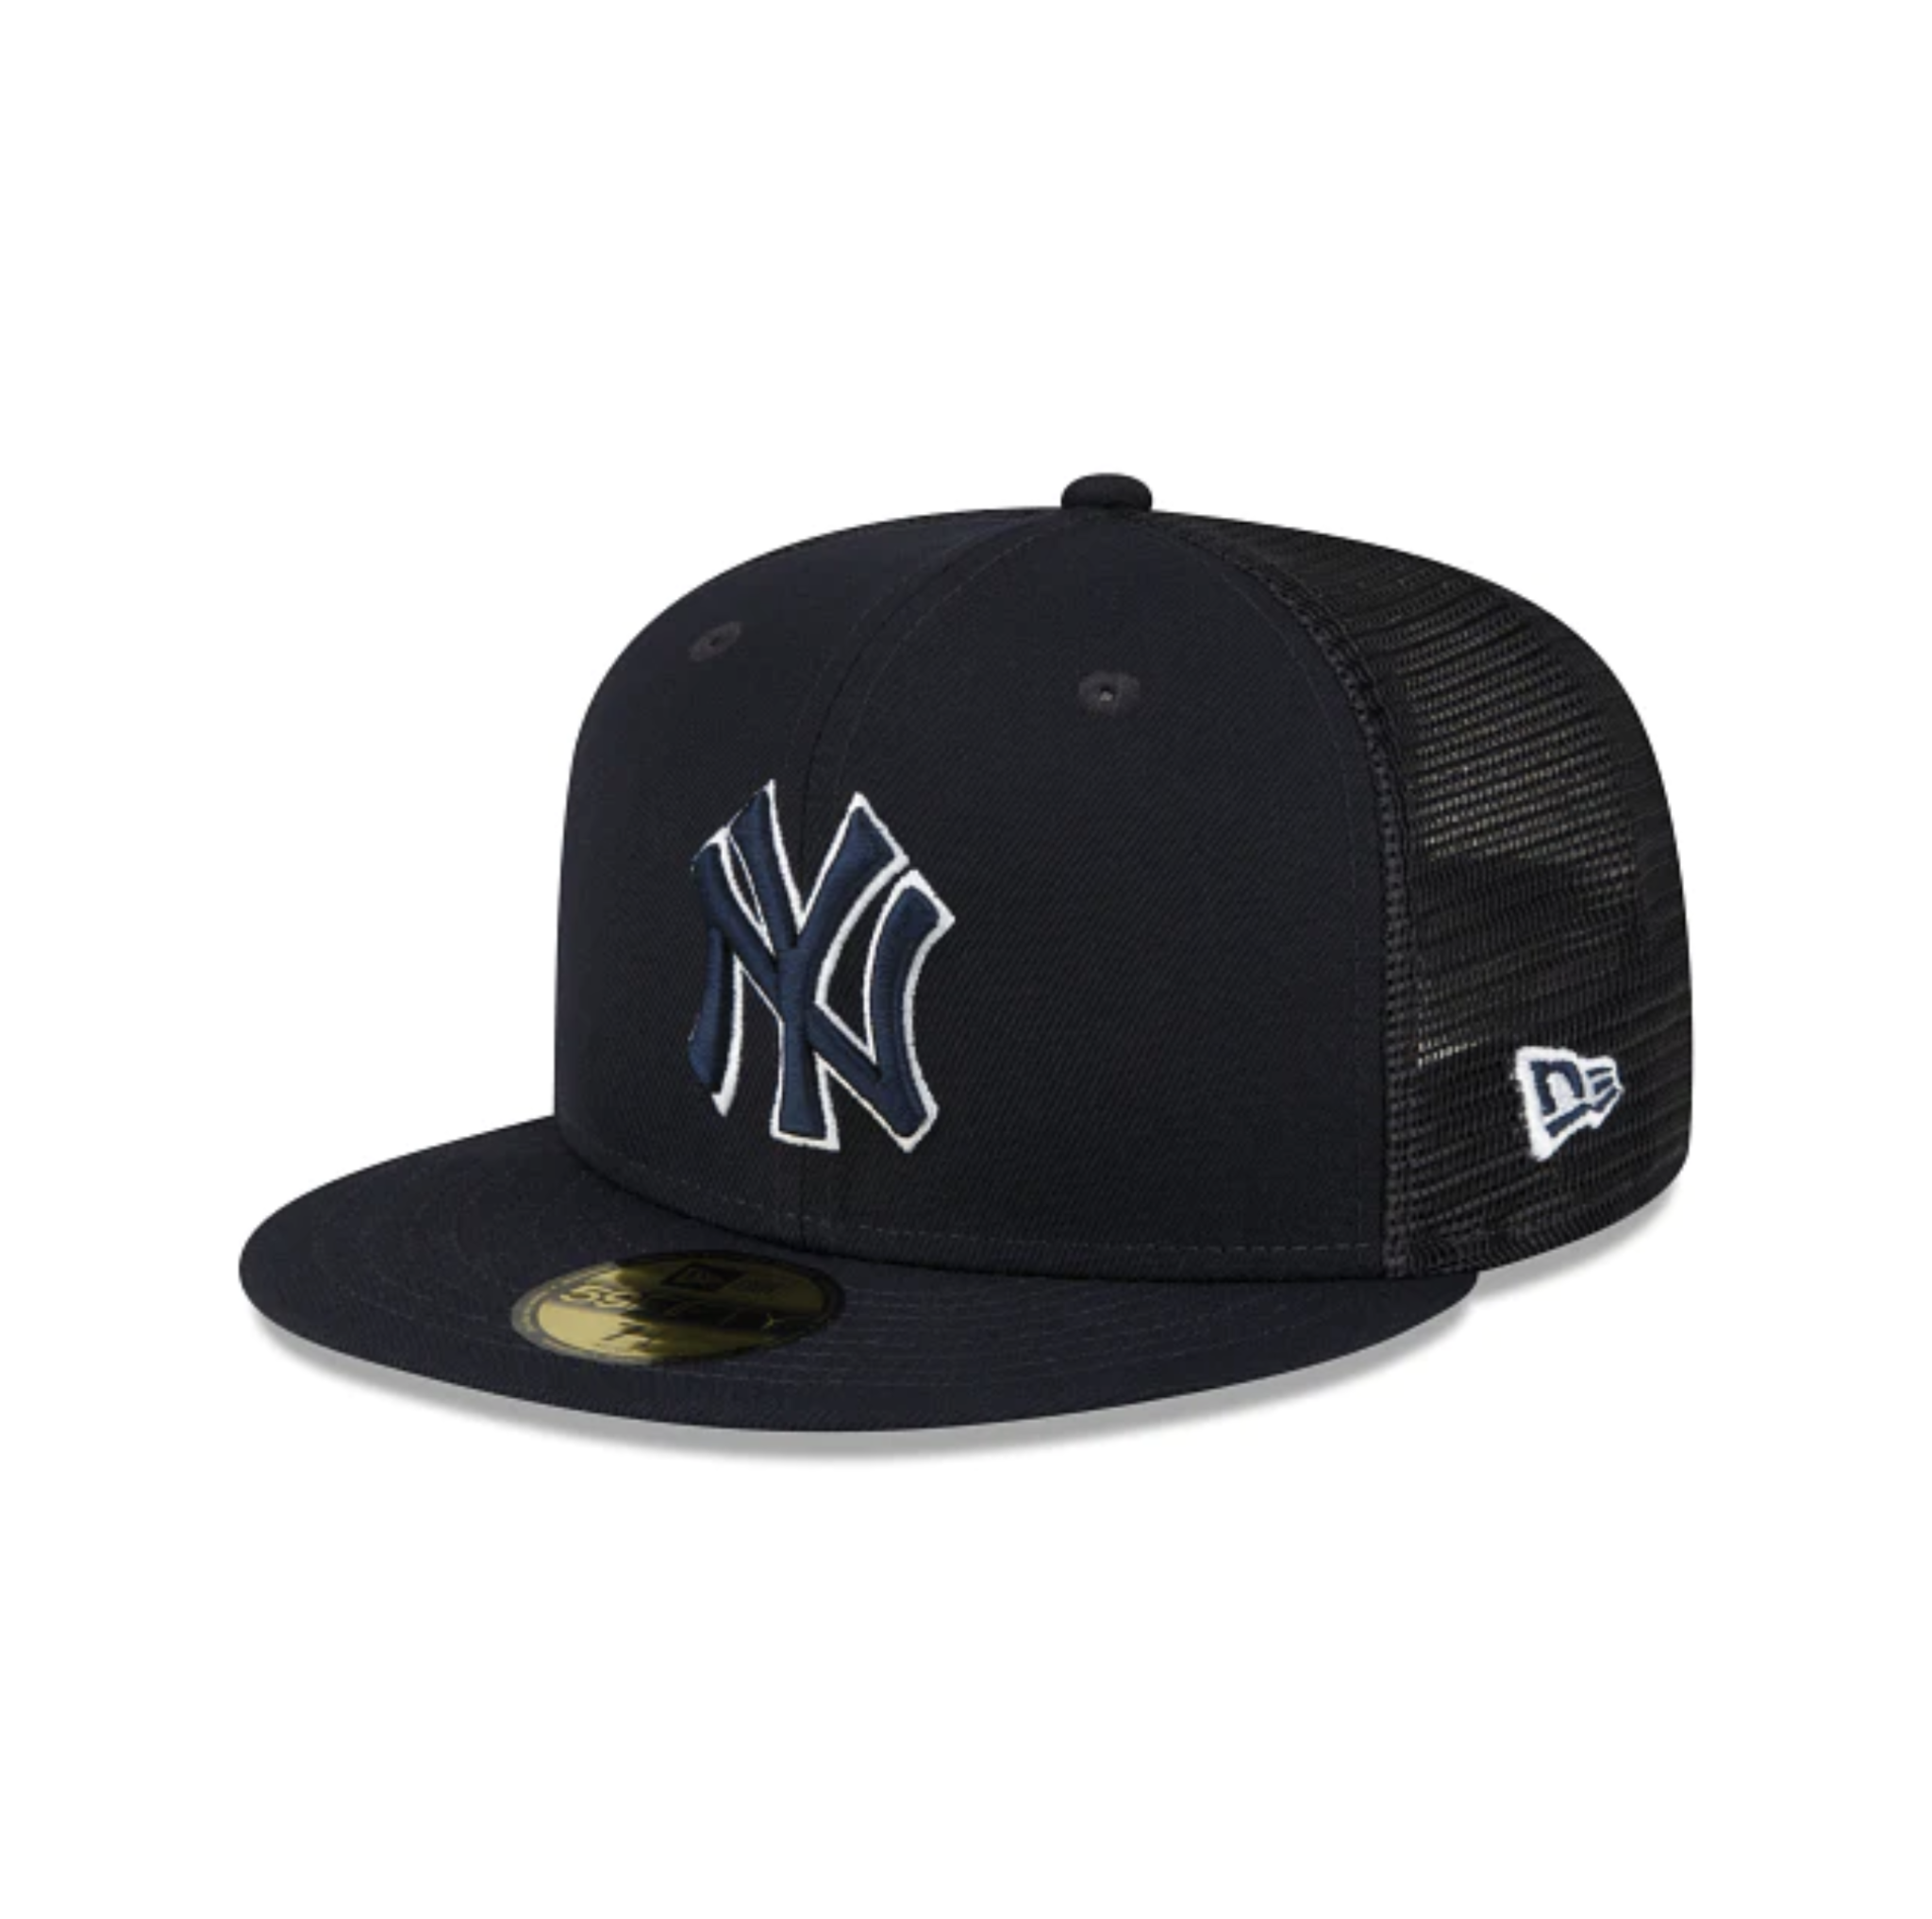 yankees spring training gear Cheap Sale - OFF 54%